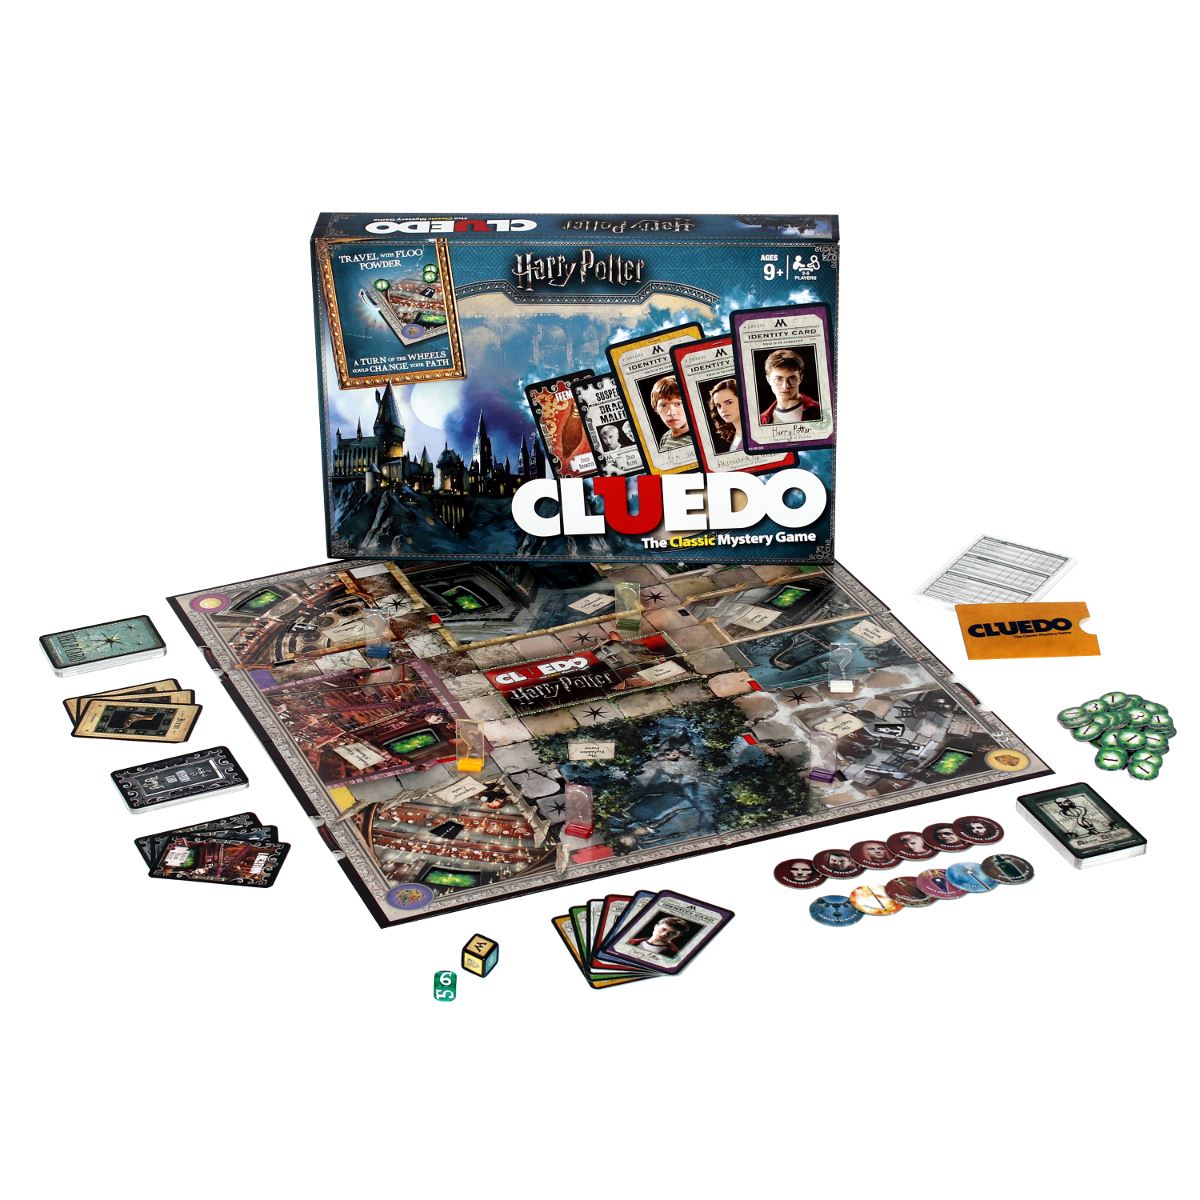 Cluedo - Harry Potter / The Classic Mystery Game